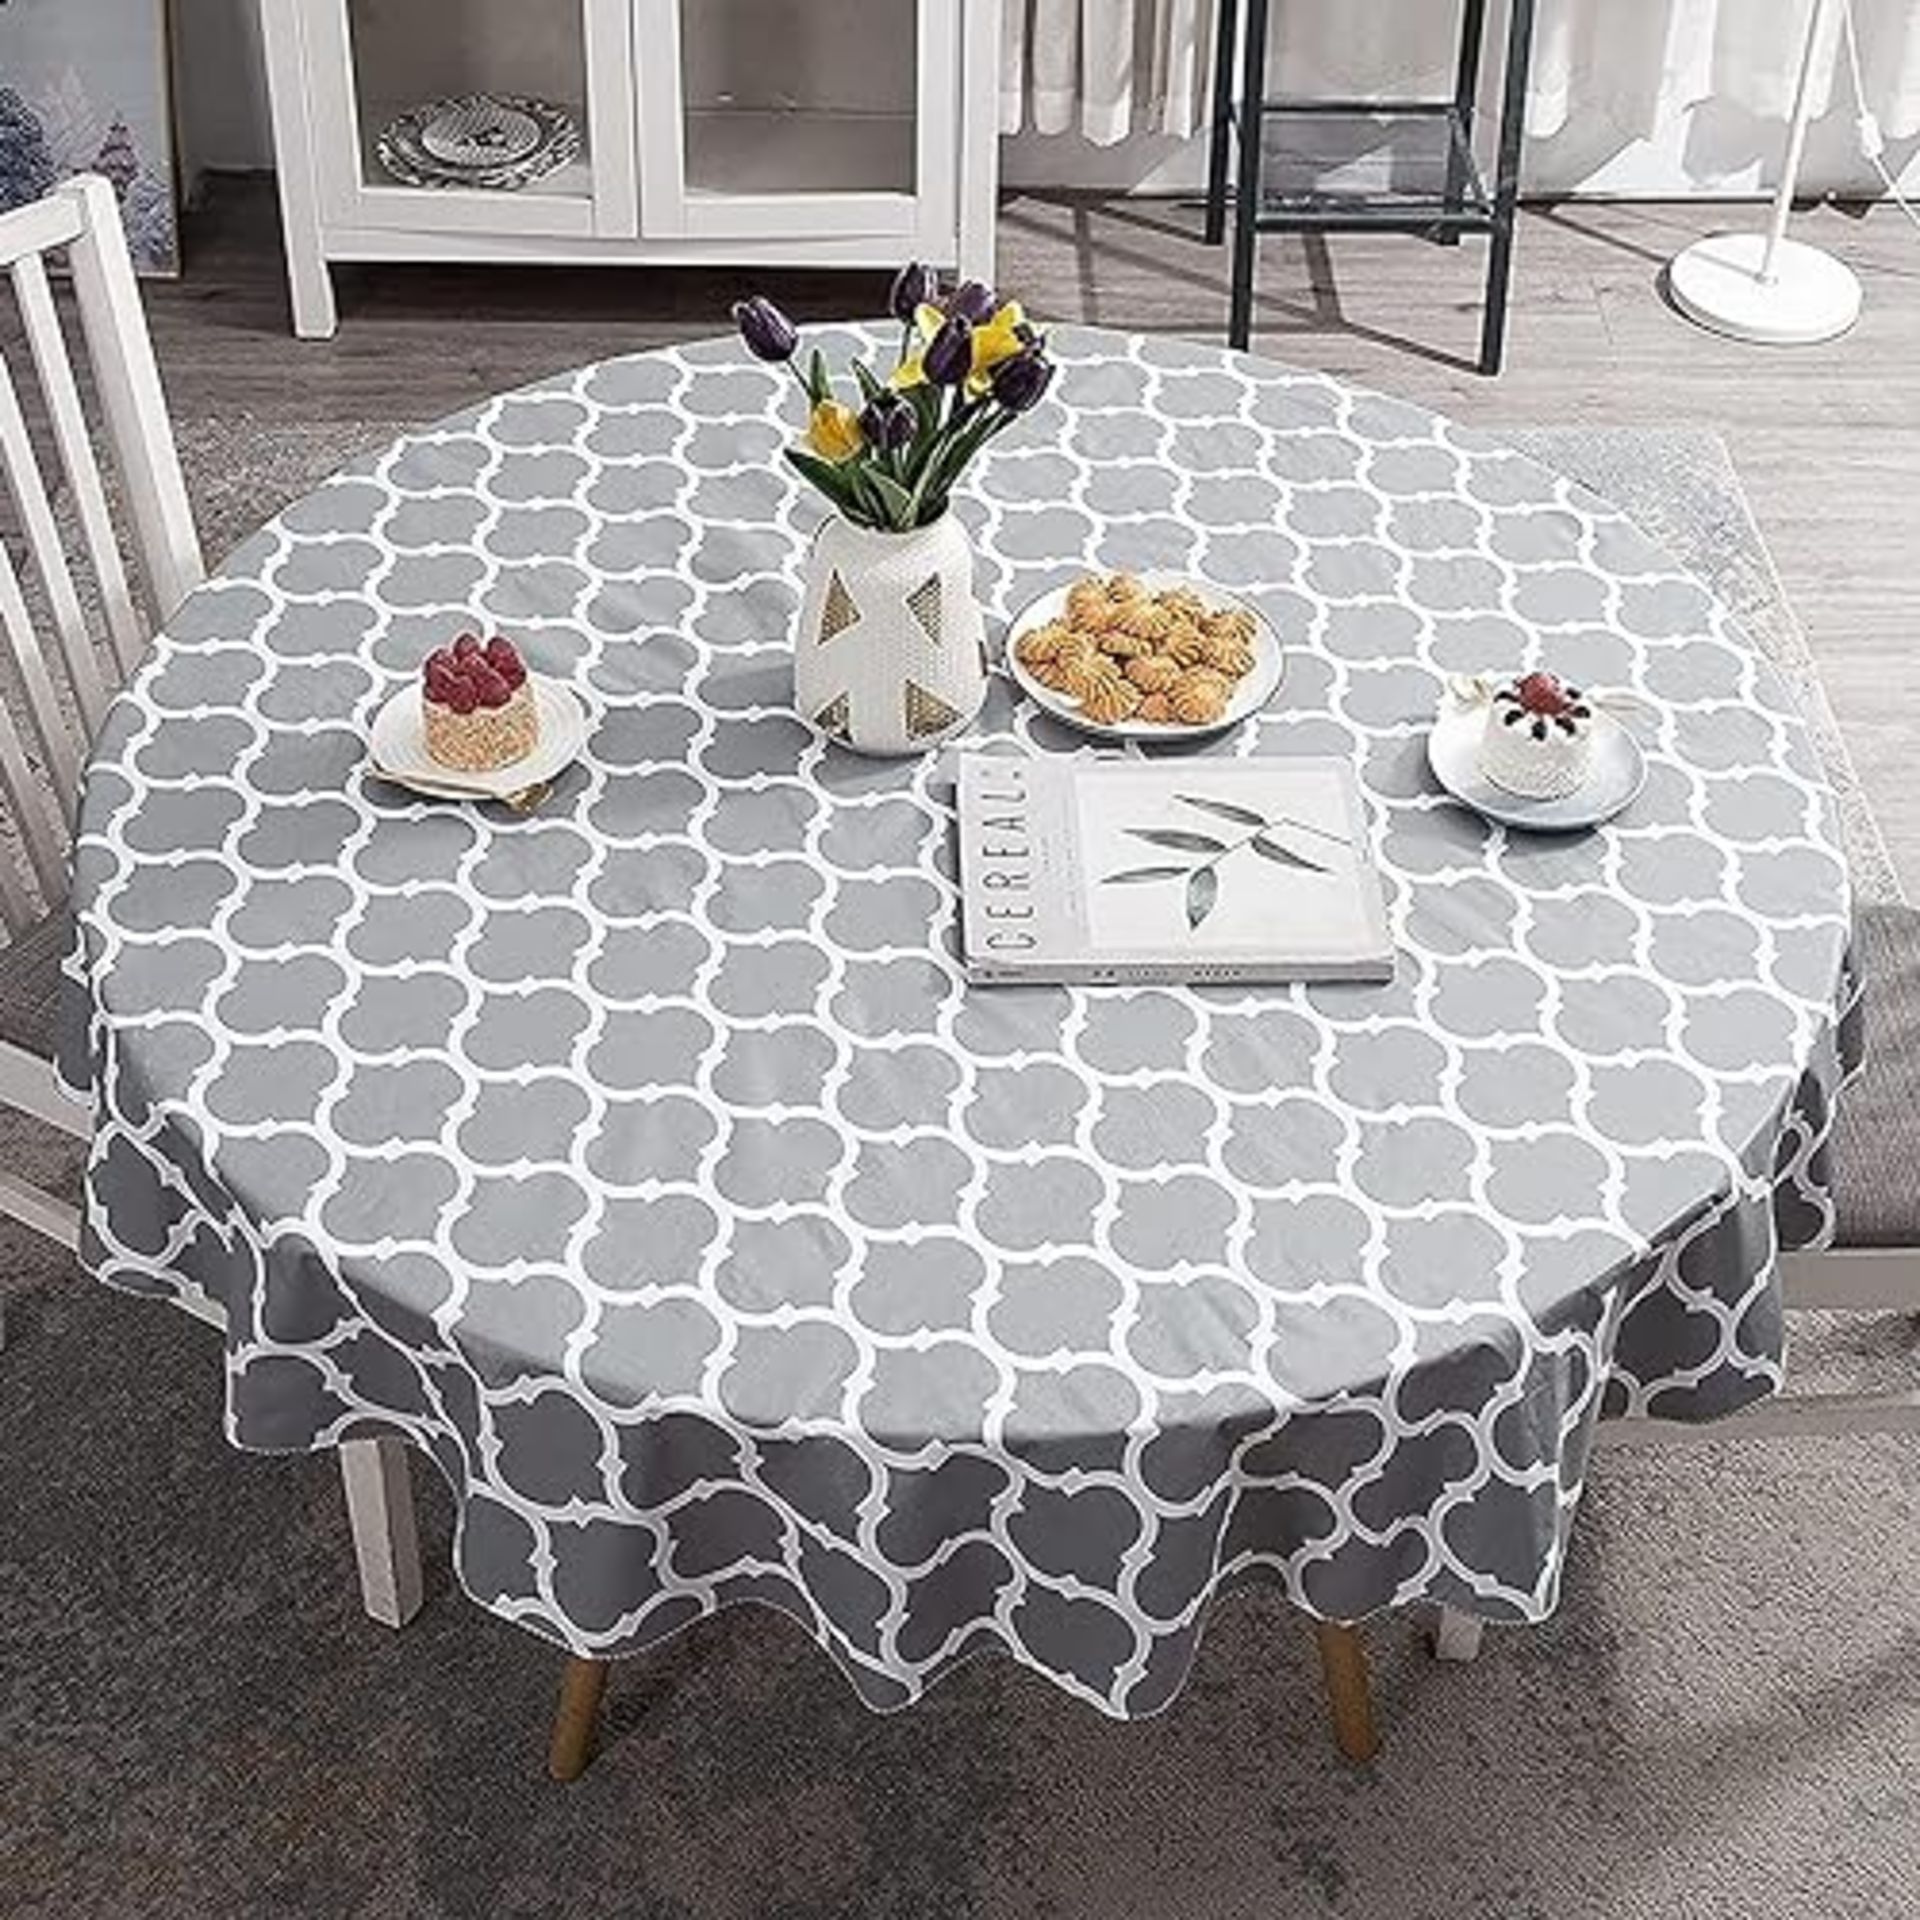 HINMAY Round Tablecloth 60 Inch, Grey Moroccan Style Vinyl Tablecloth with Non-Slip Flannel Backing